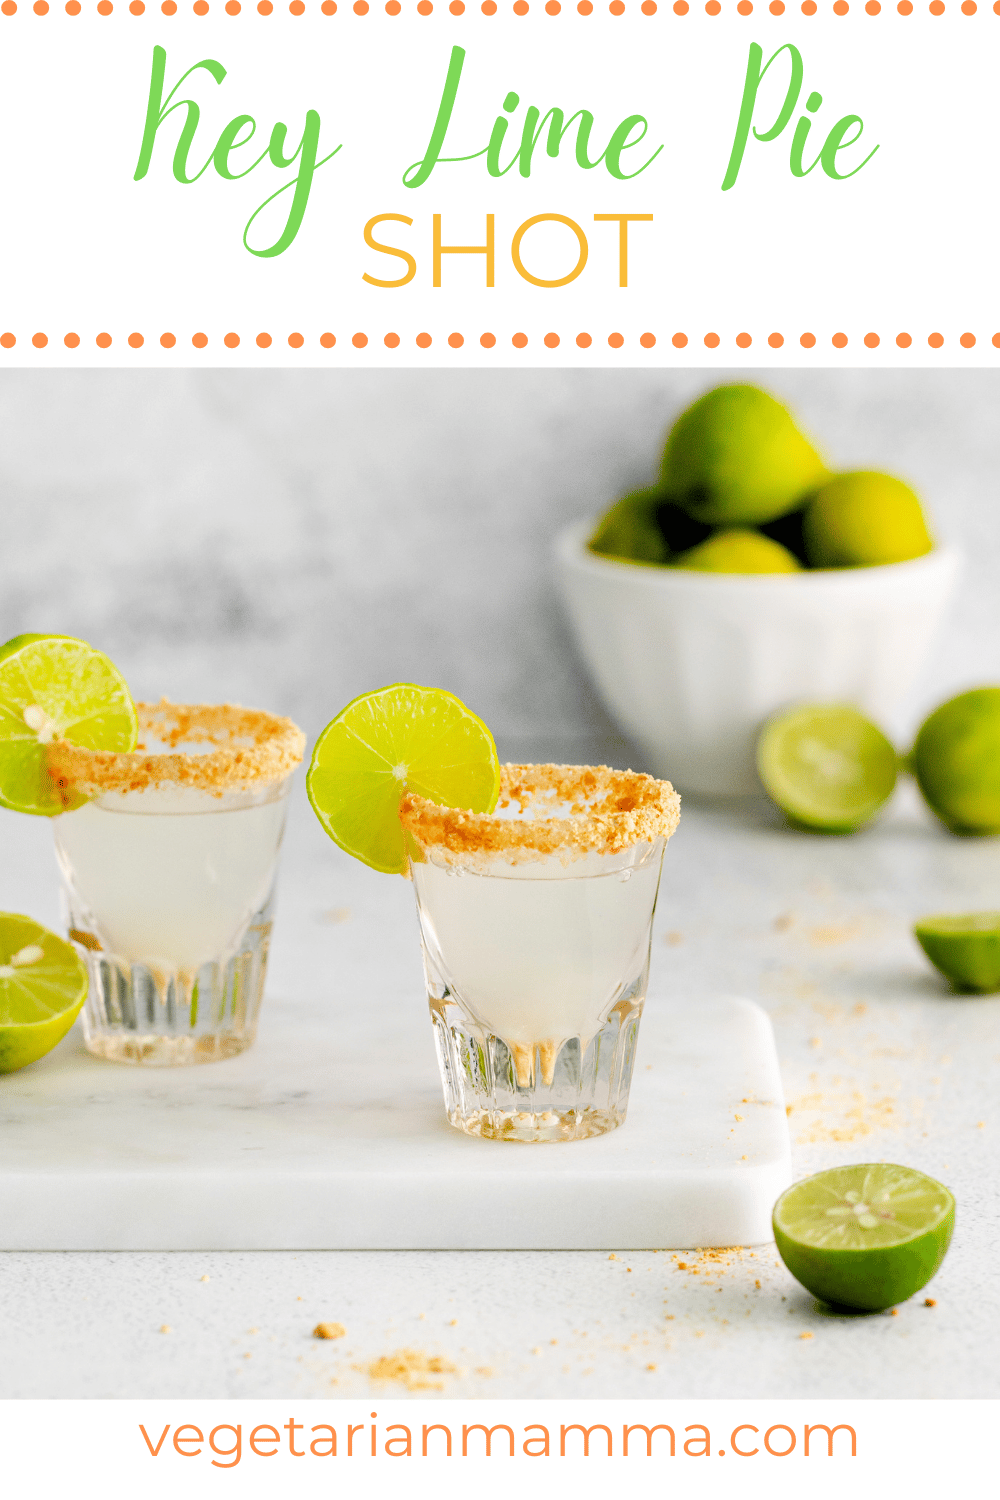 Shot Glass Key Lime Drink New Recipe on Shooter Glass New Beach Pie Florida 13 